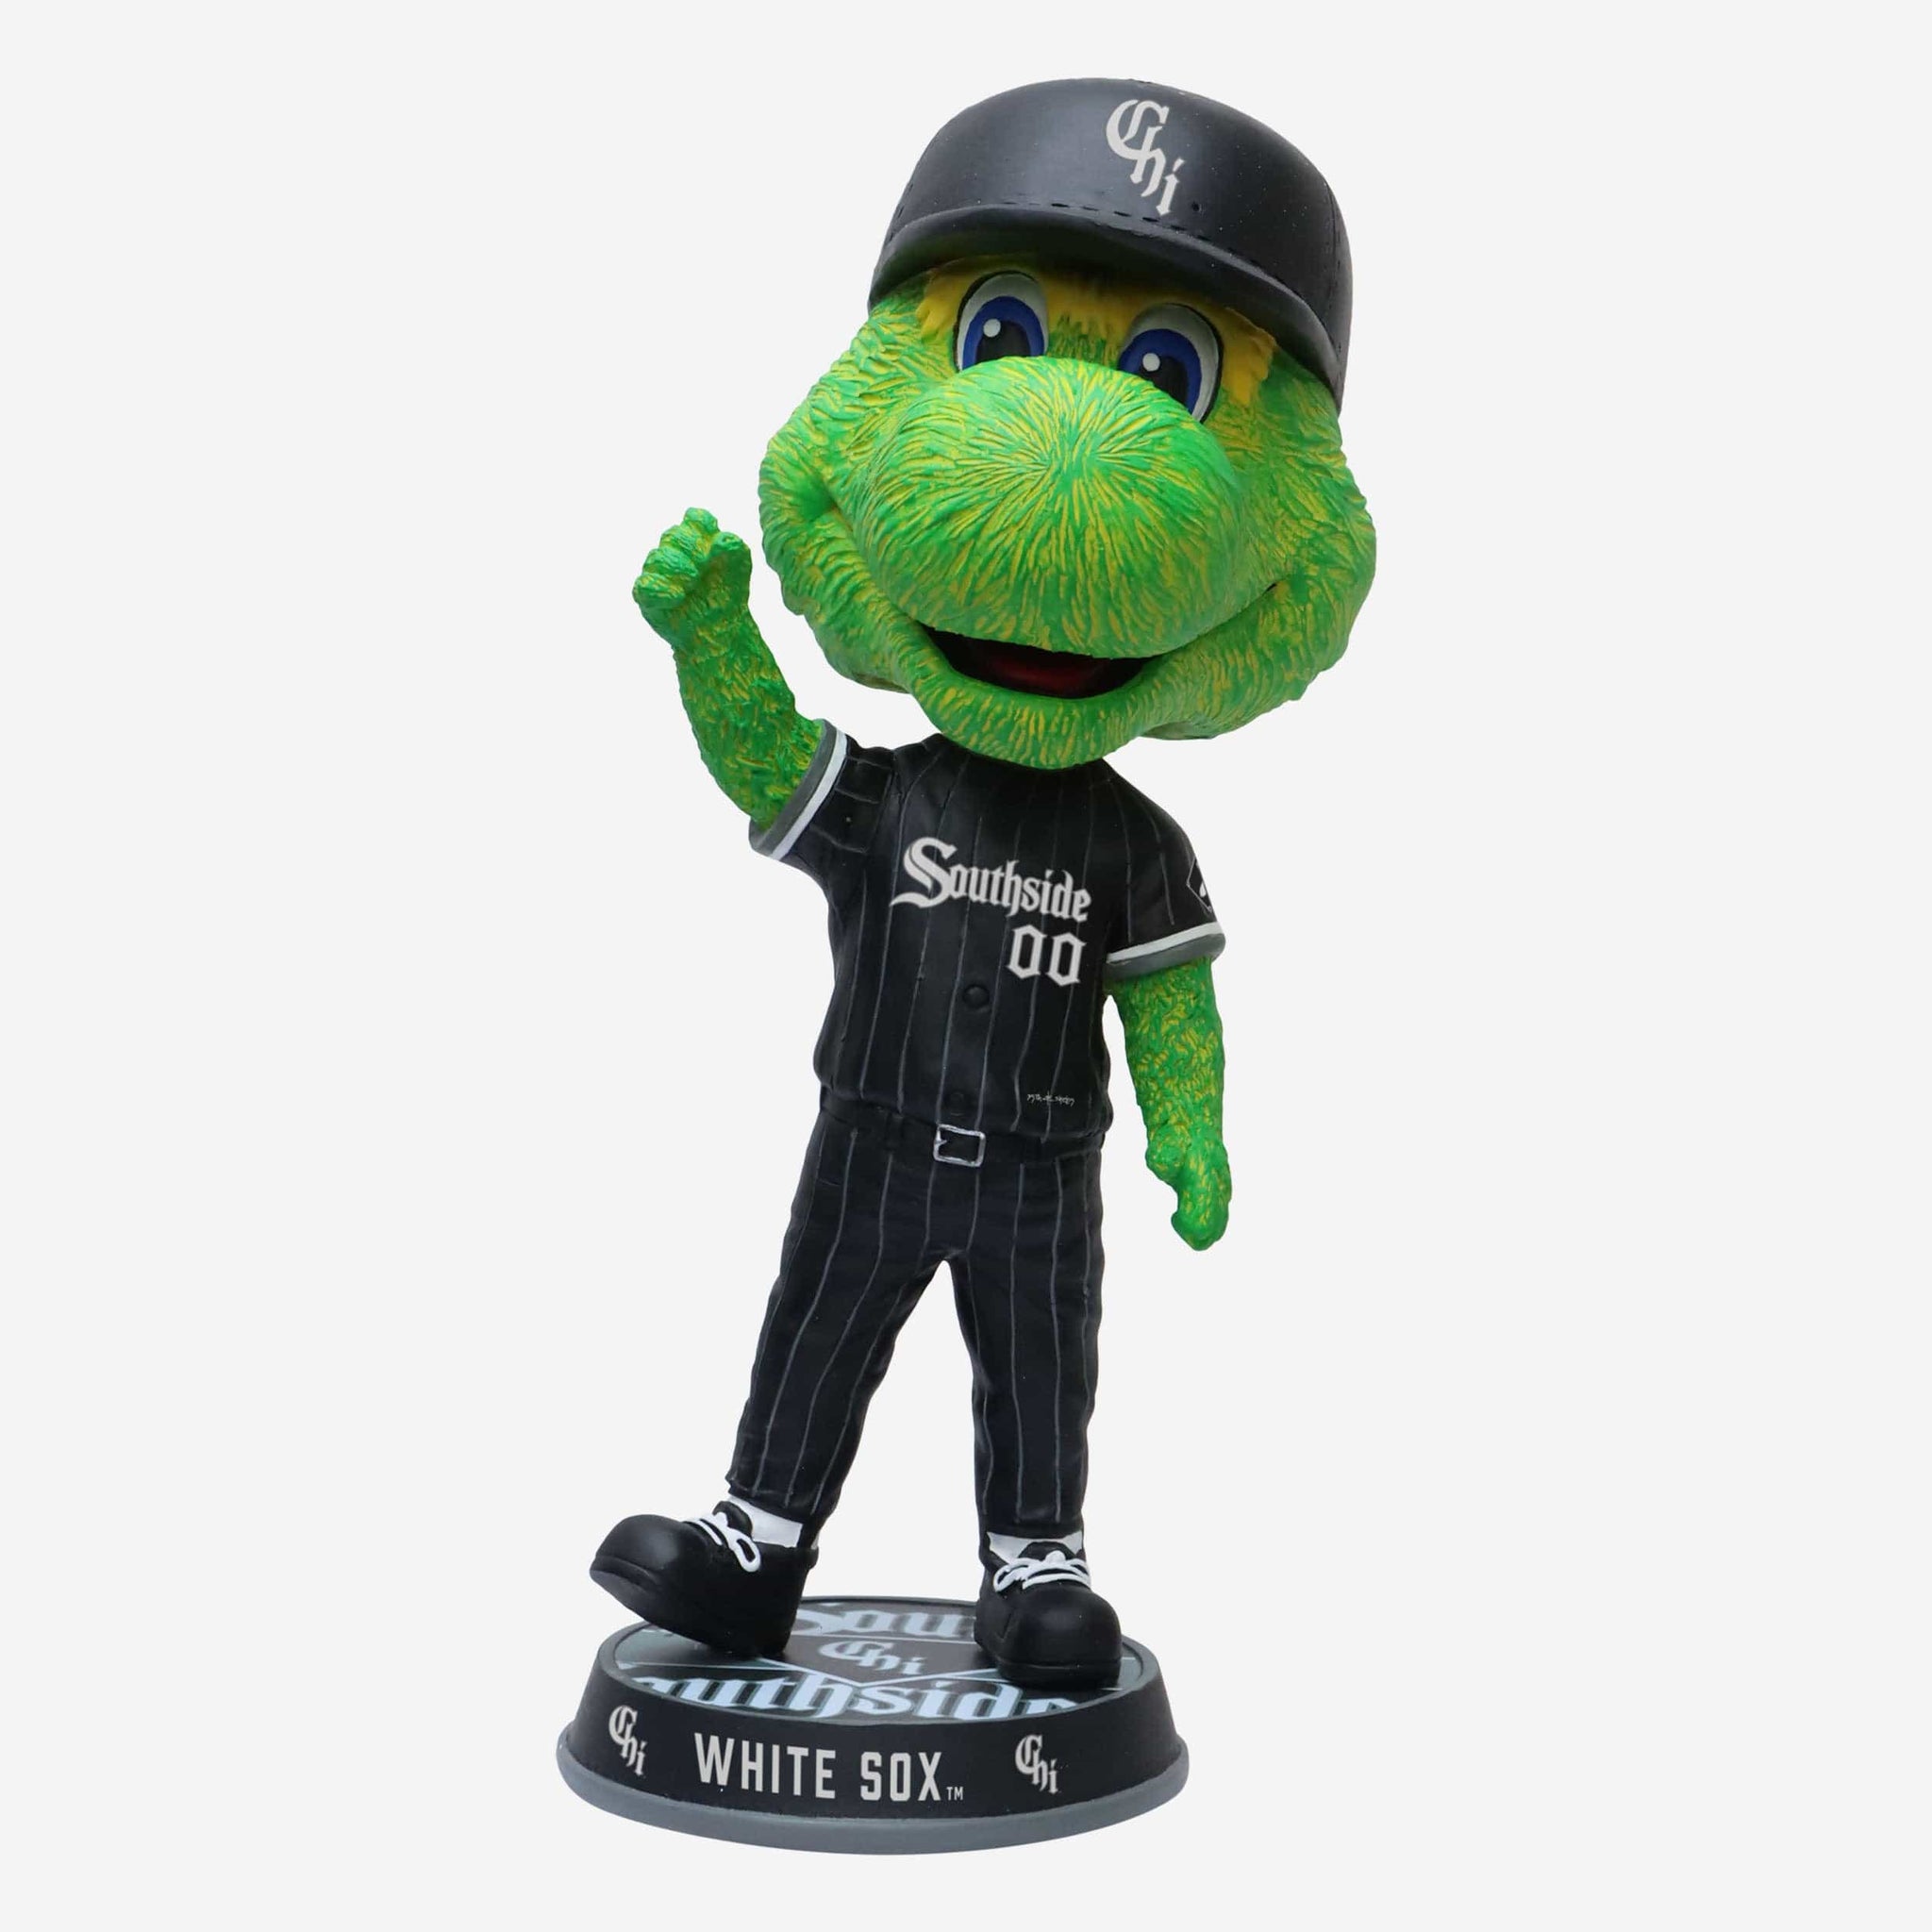 SOUTHPAW CHICAGO WHITE SOX OPENING DAY MASCOT BOBBLEHEAD